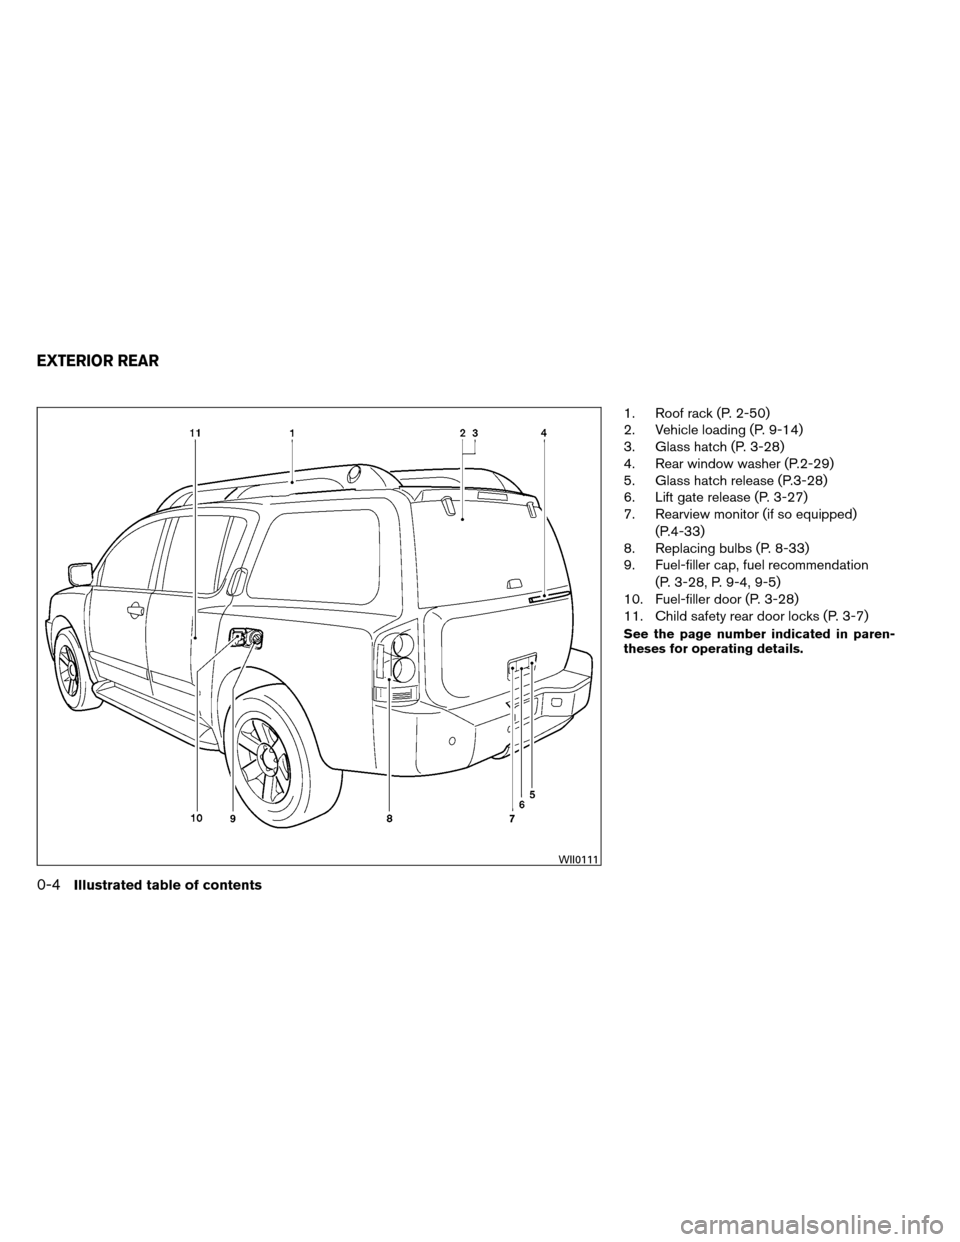 NISSAN ARMADA 2012 1.G Owners Manual 1. Roof rack (P. 2-50)
2. Vehicle loading (P. 9-14)
3. Glass hatch (P. 3-28)
4. Rear window washer (P.2-29)
5. Glass hatch release (P.3-28)
6. Lift gate release (P. 3-27)
7. Rearview monitor (if so eq